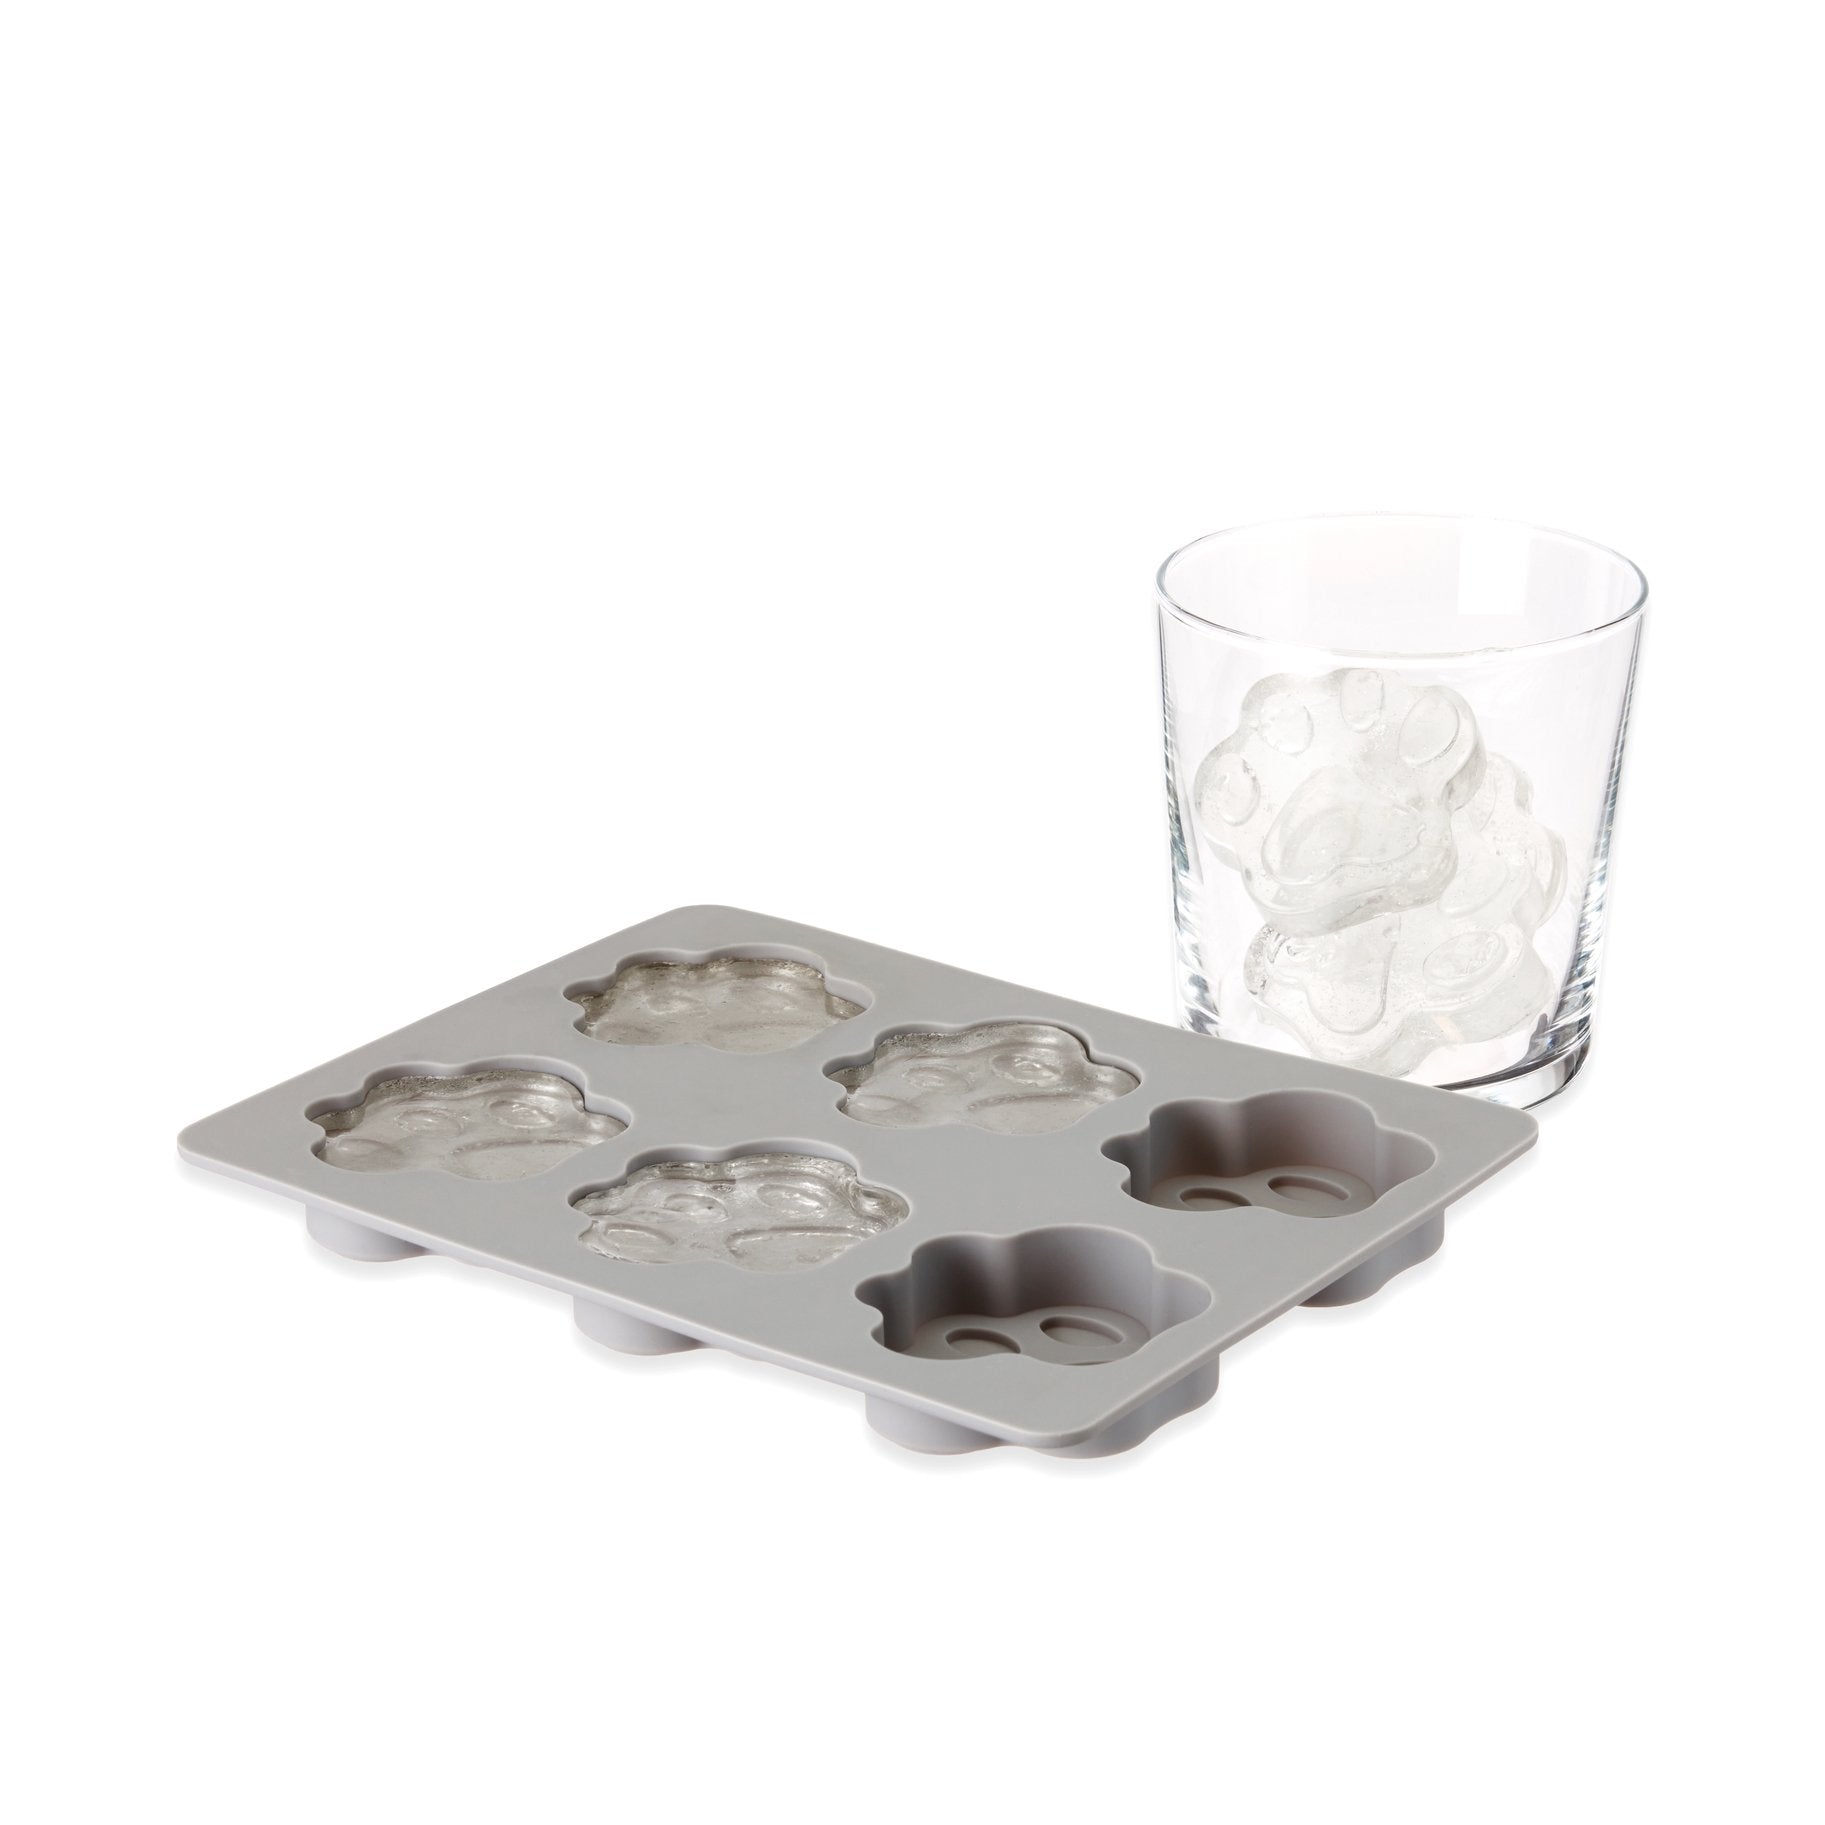 Funny Gifts For Cat Lovers, Paw Print Ice Cube Mold